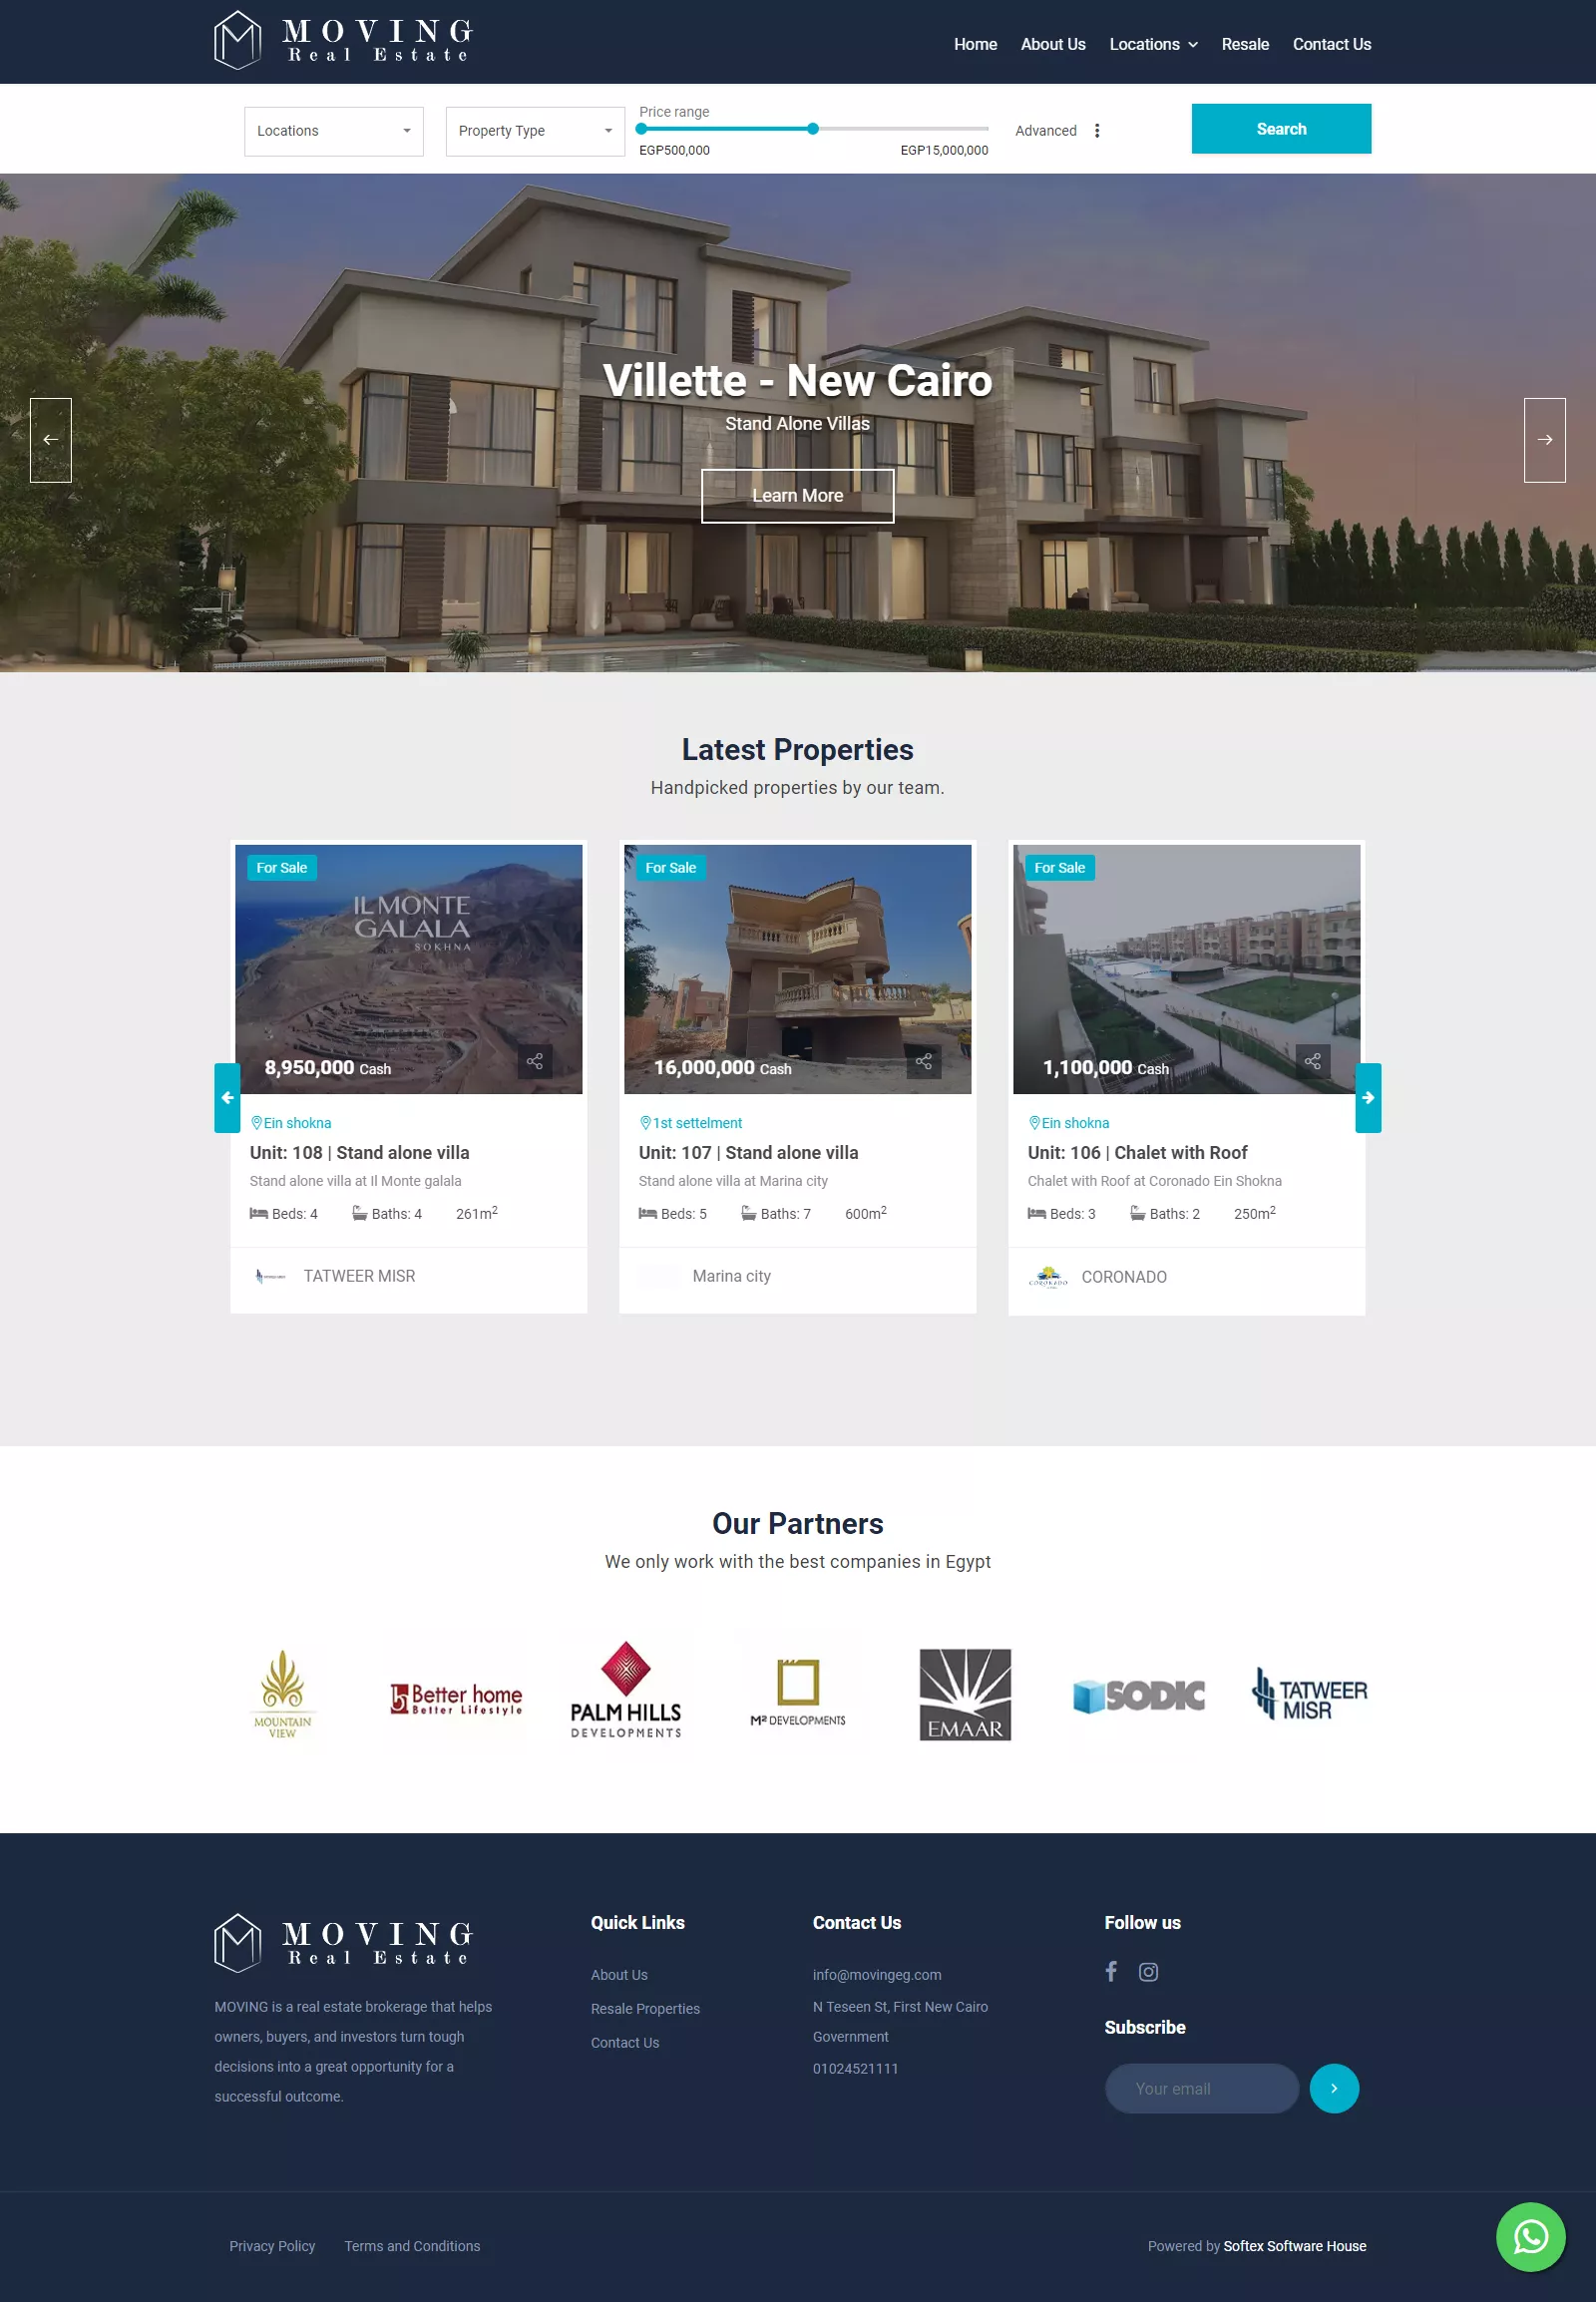 Moving Real Estate Website Project